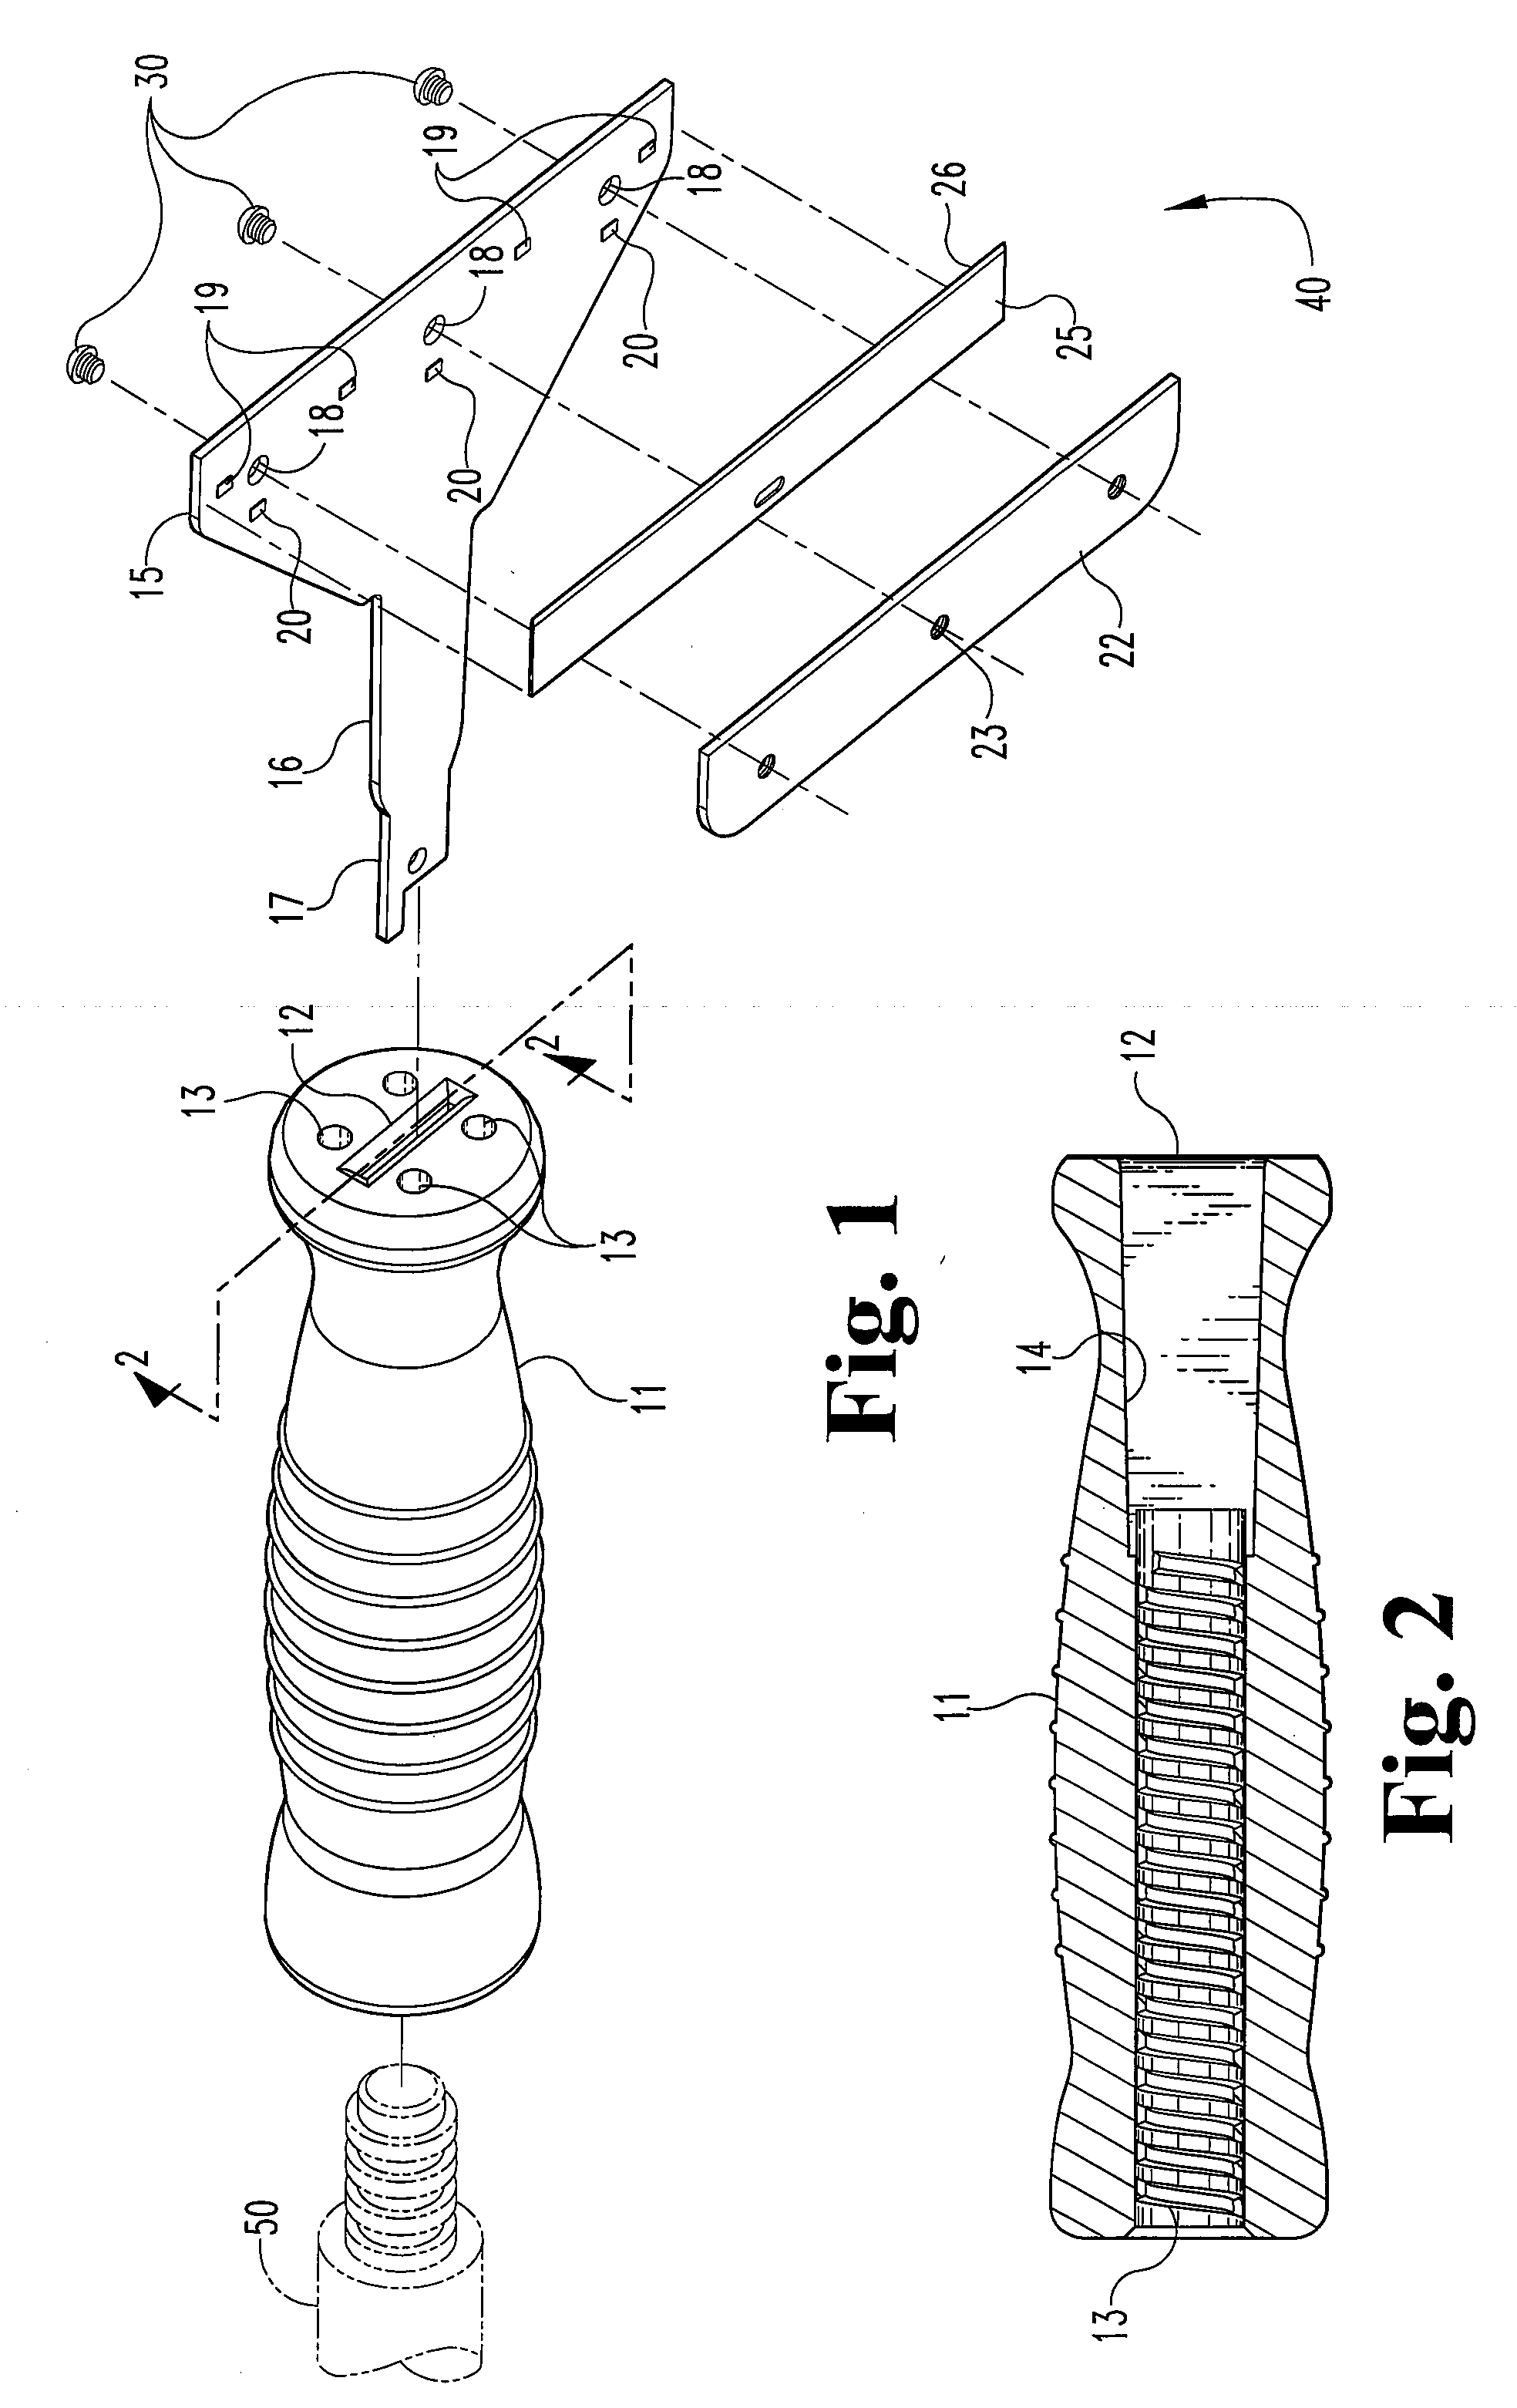 Tool with exchangeable piece